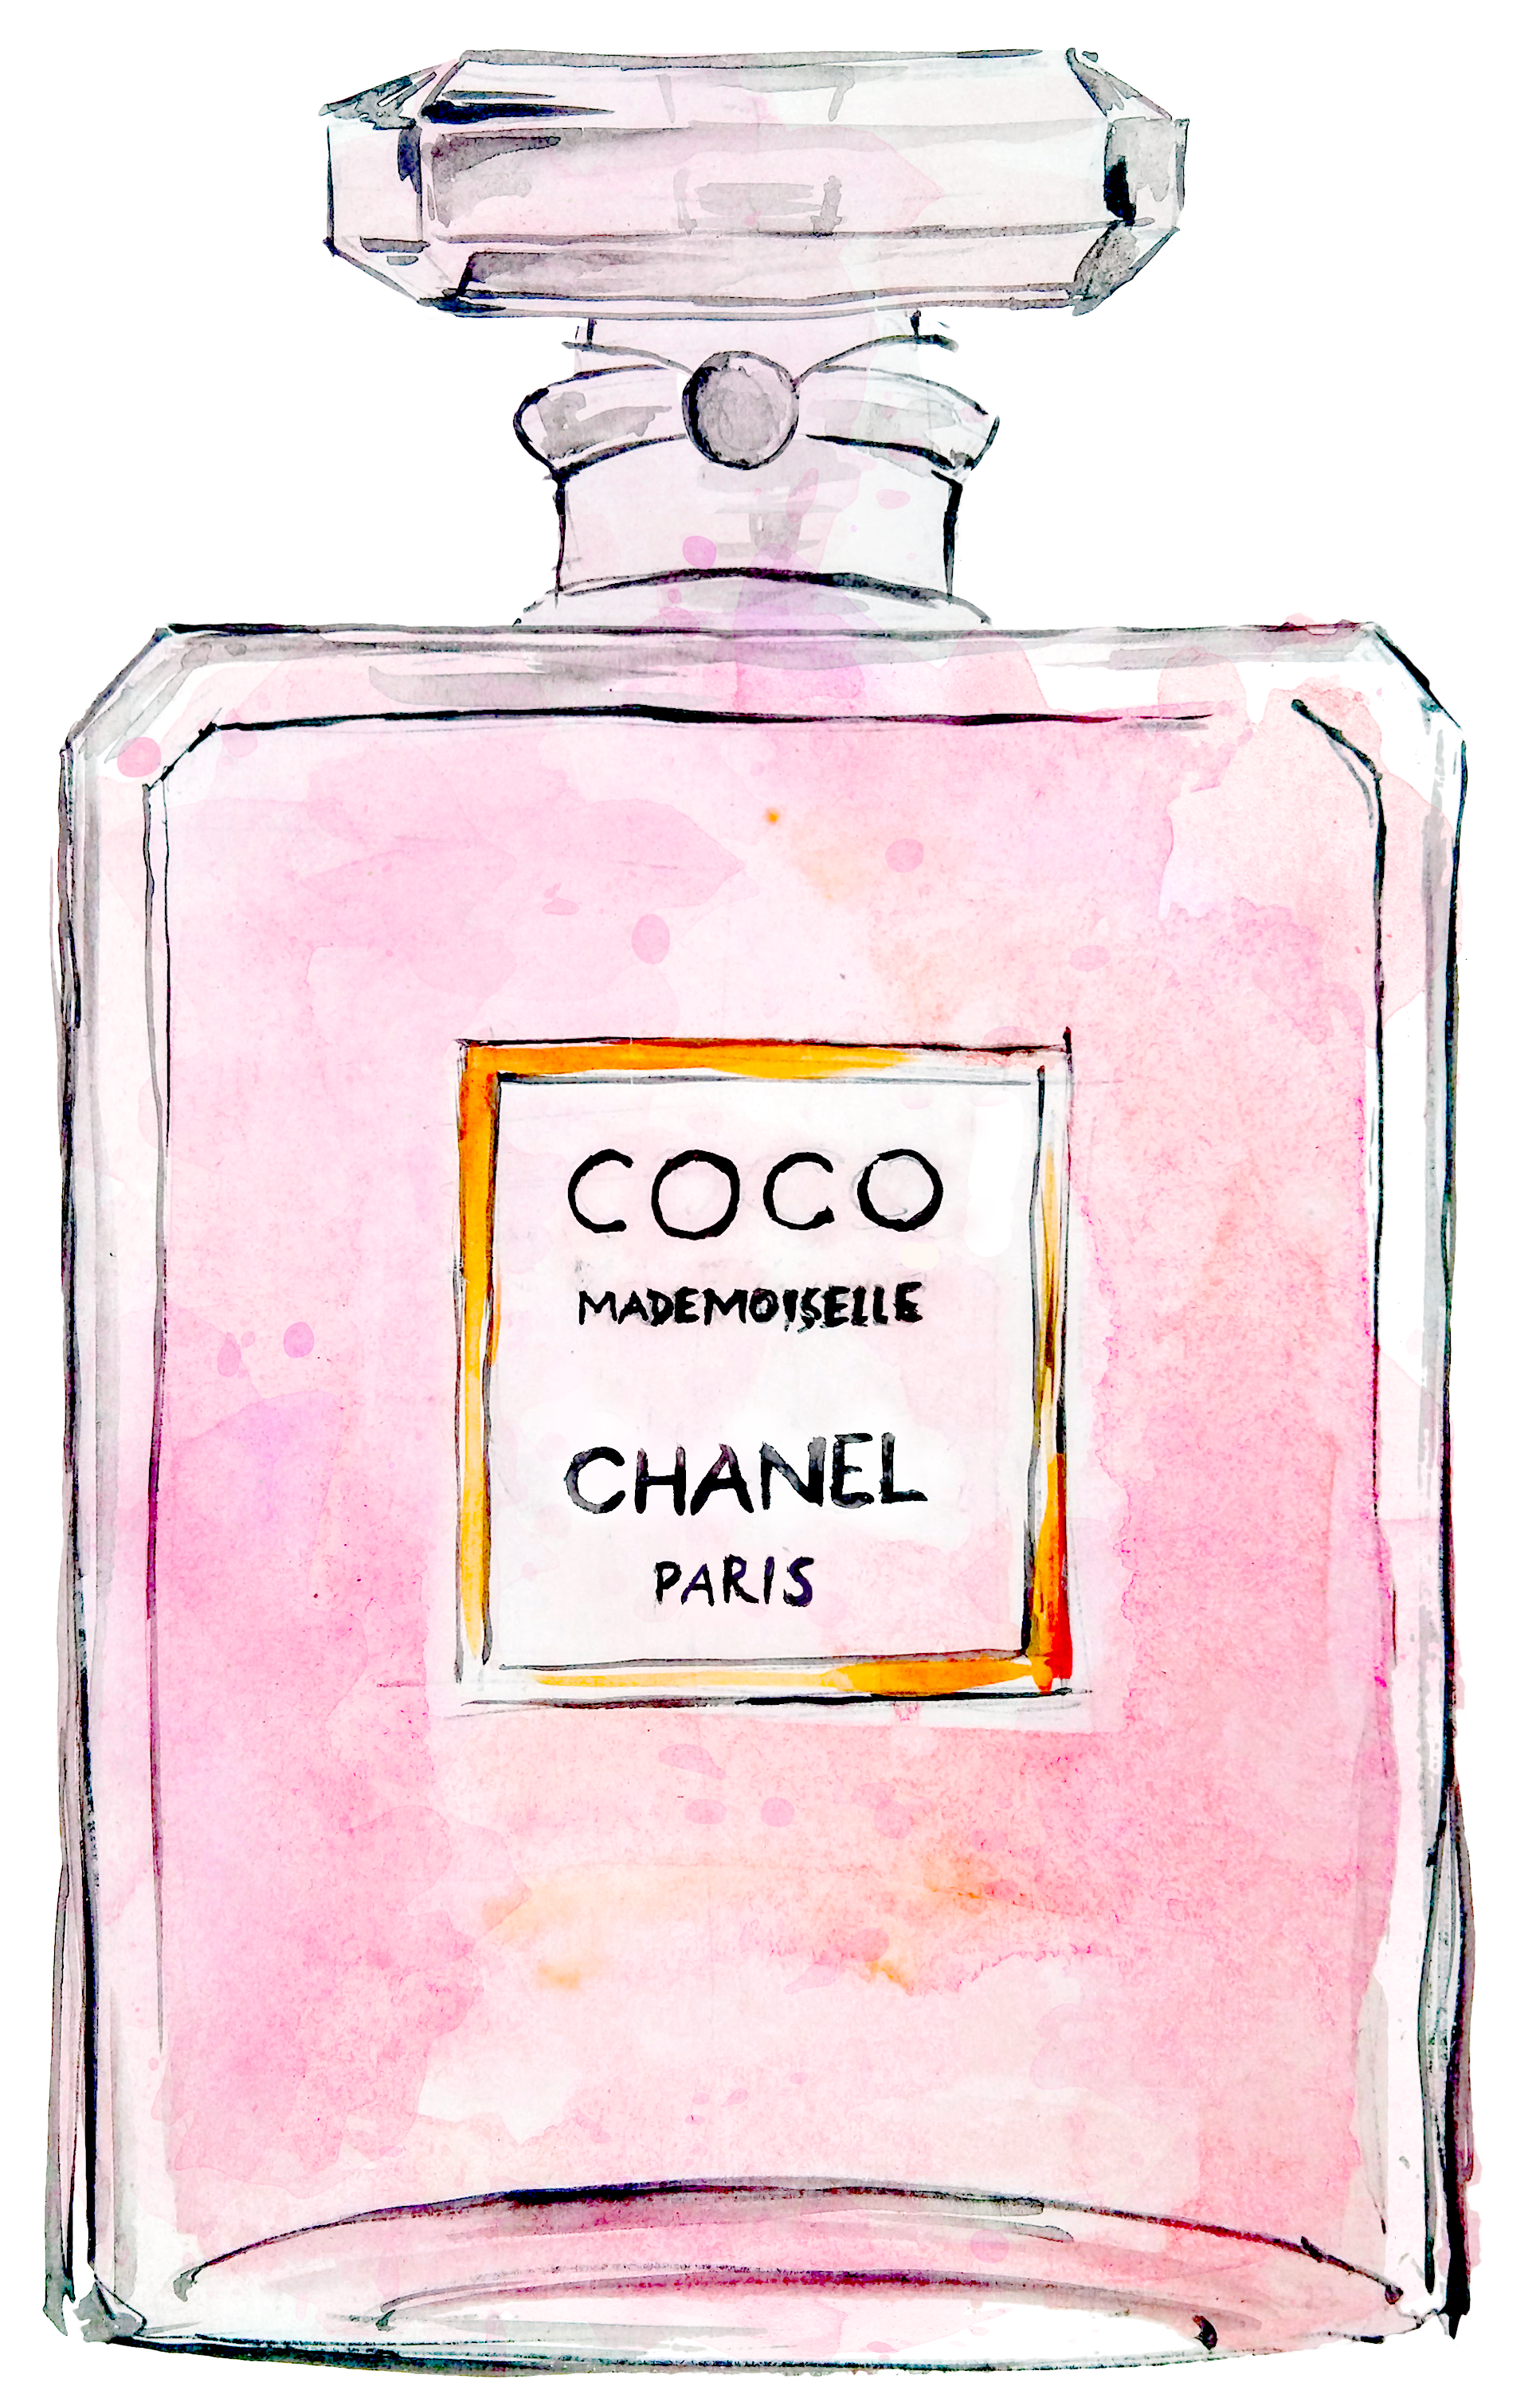 Download Mademoiselle No. Chanel,Coco Perfume Coco Chanel HQ PNG Image